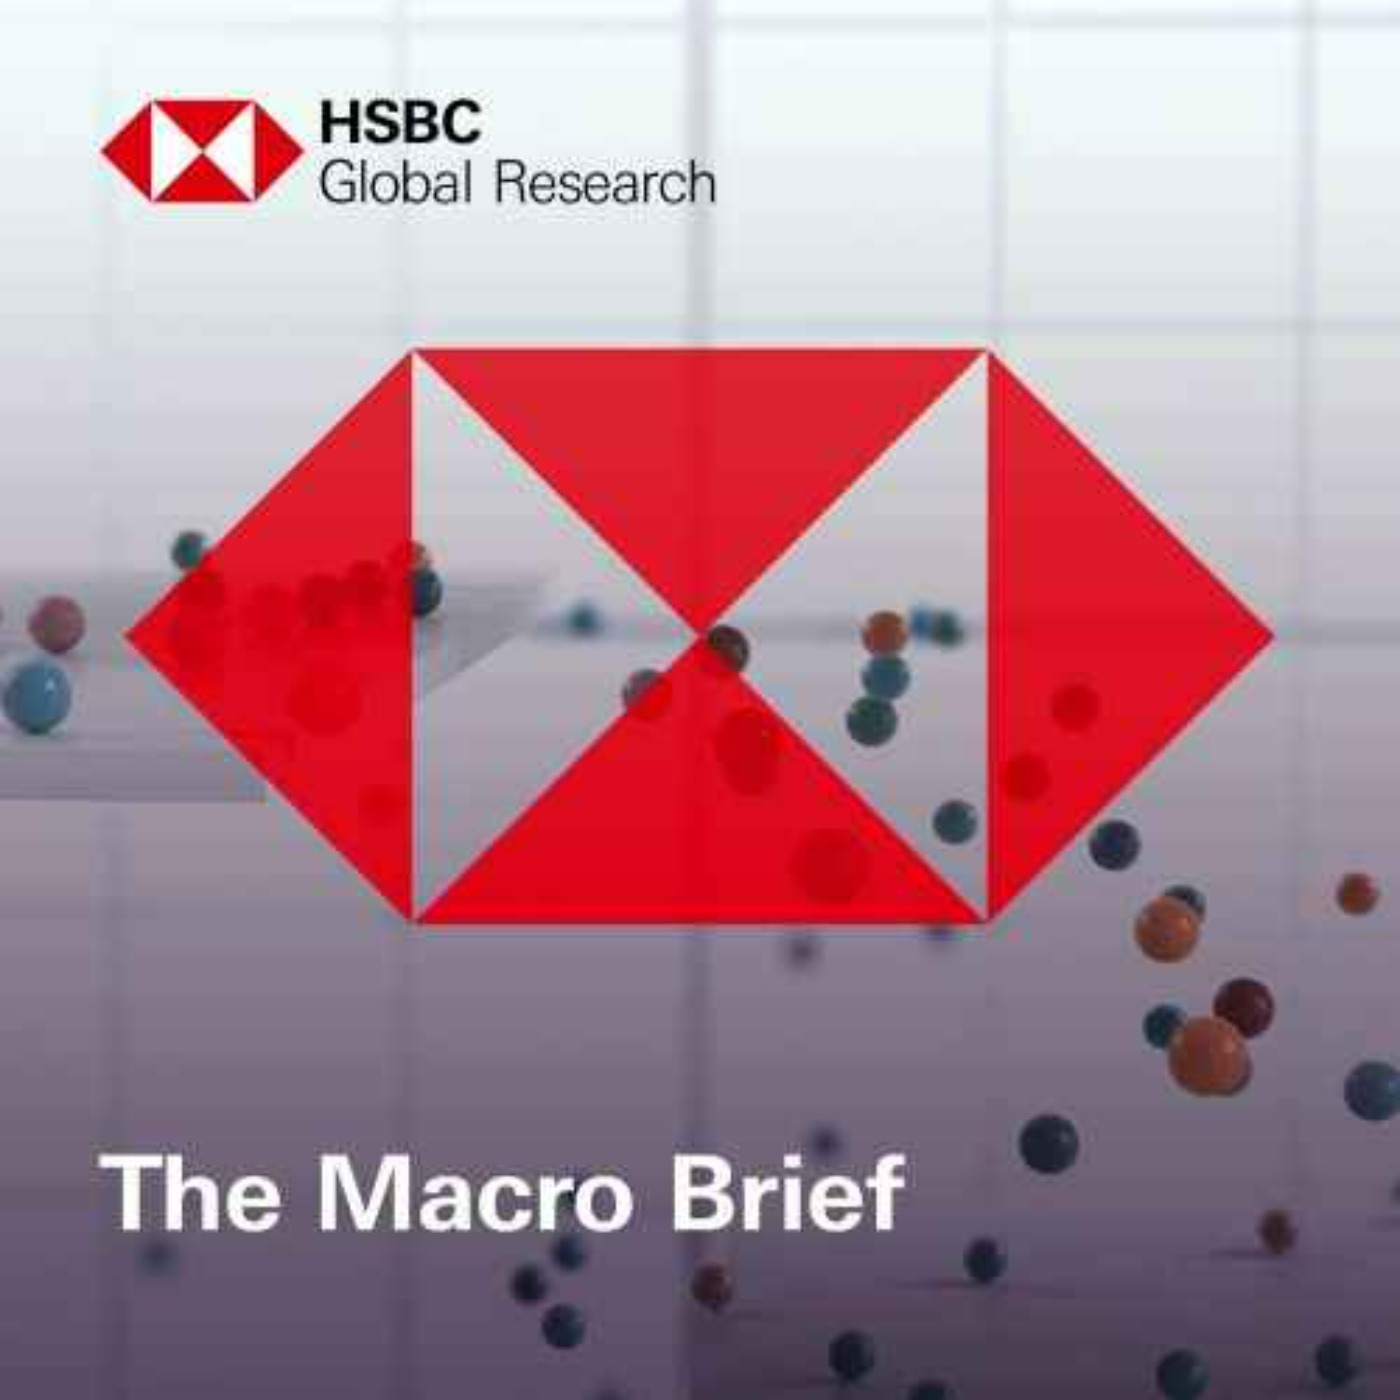 The Macro Brief - What next for the global economy?